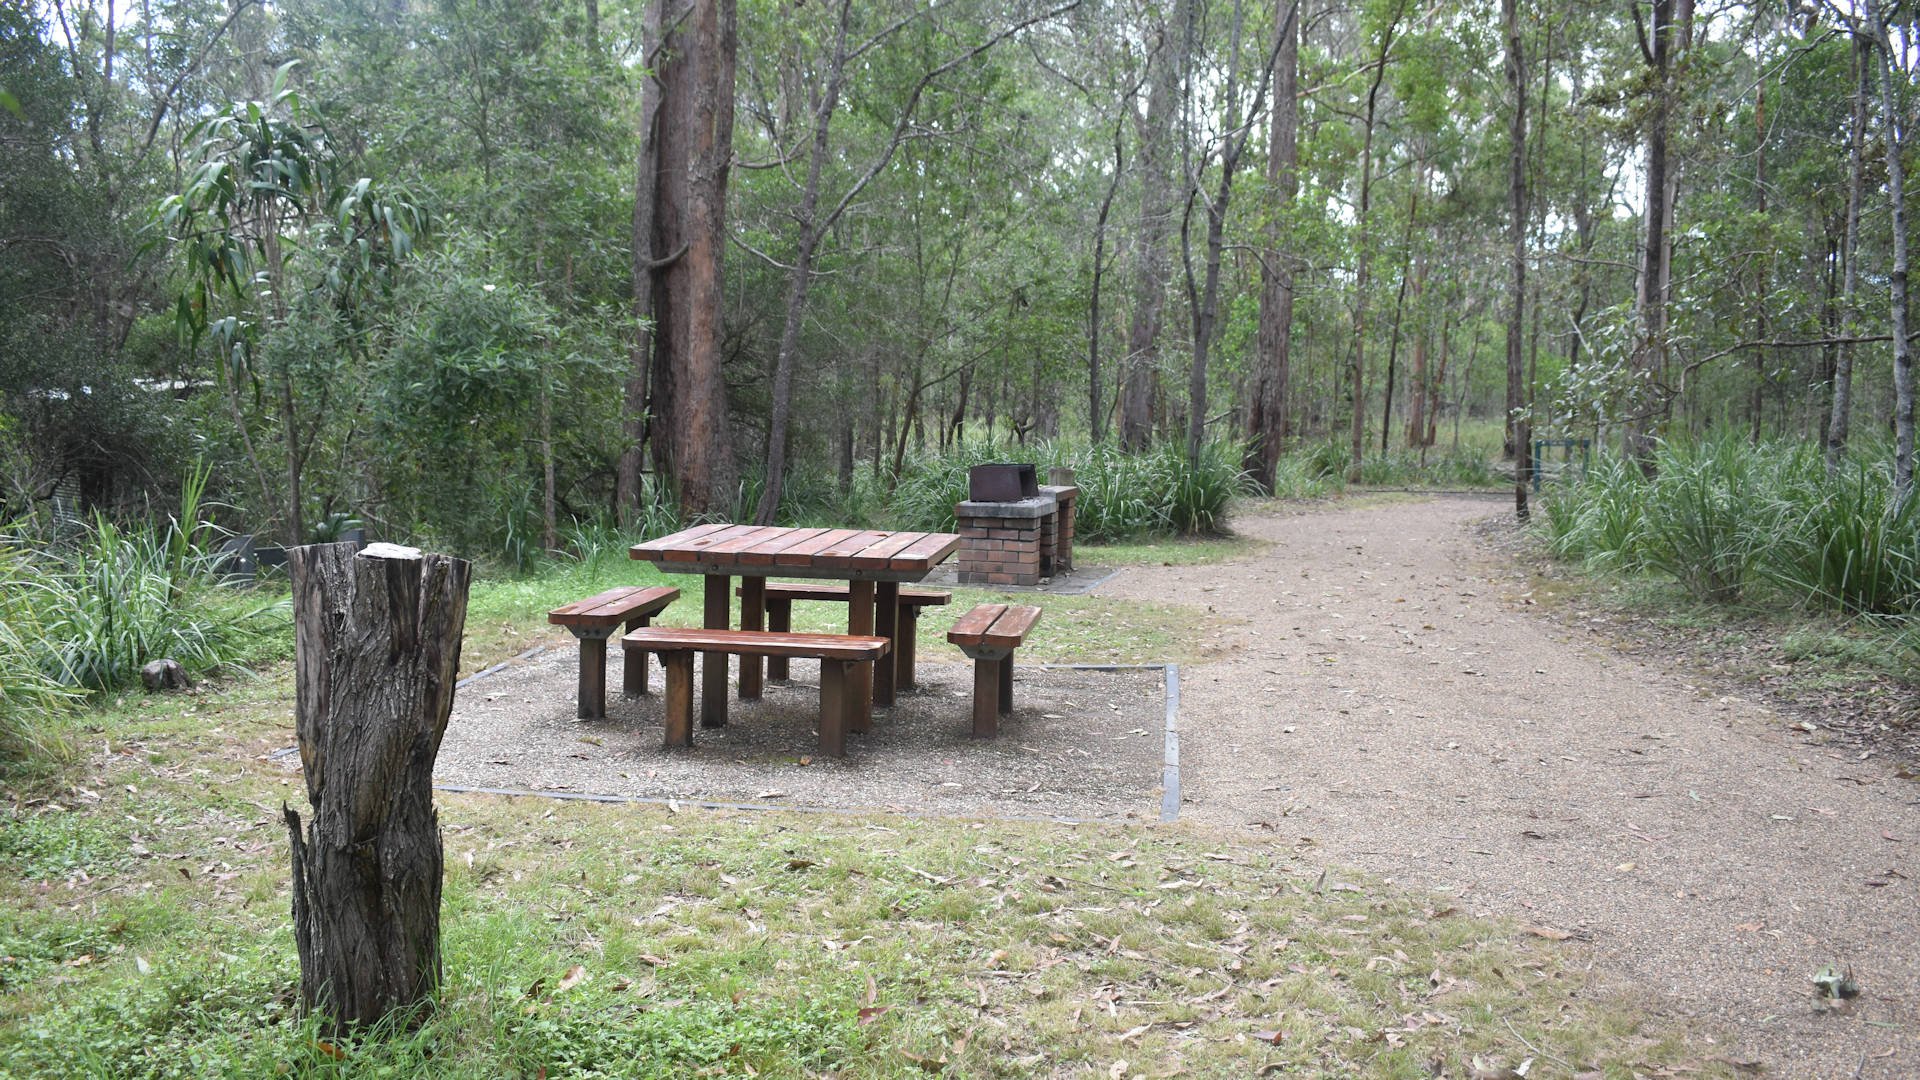 Picnic table and BBQ in Venman Bushland National Park